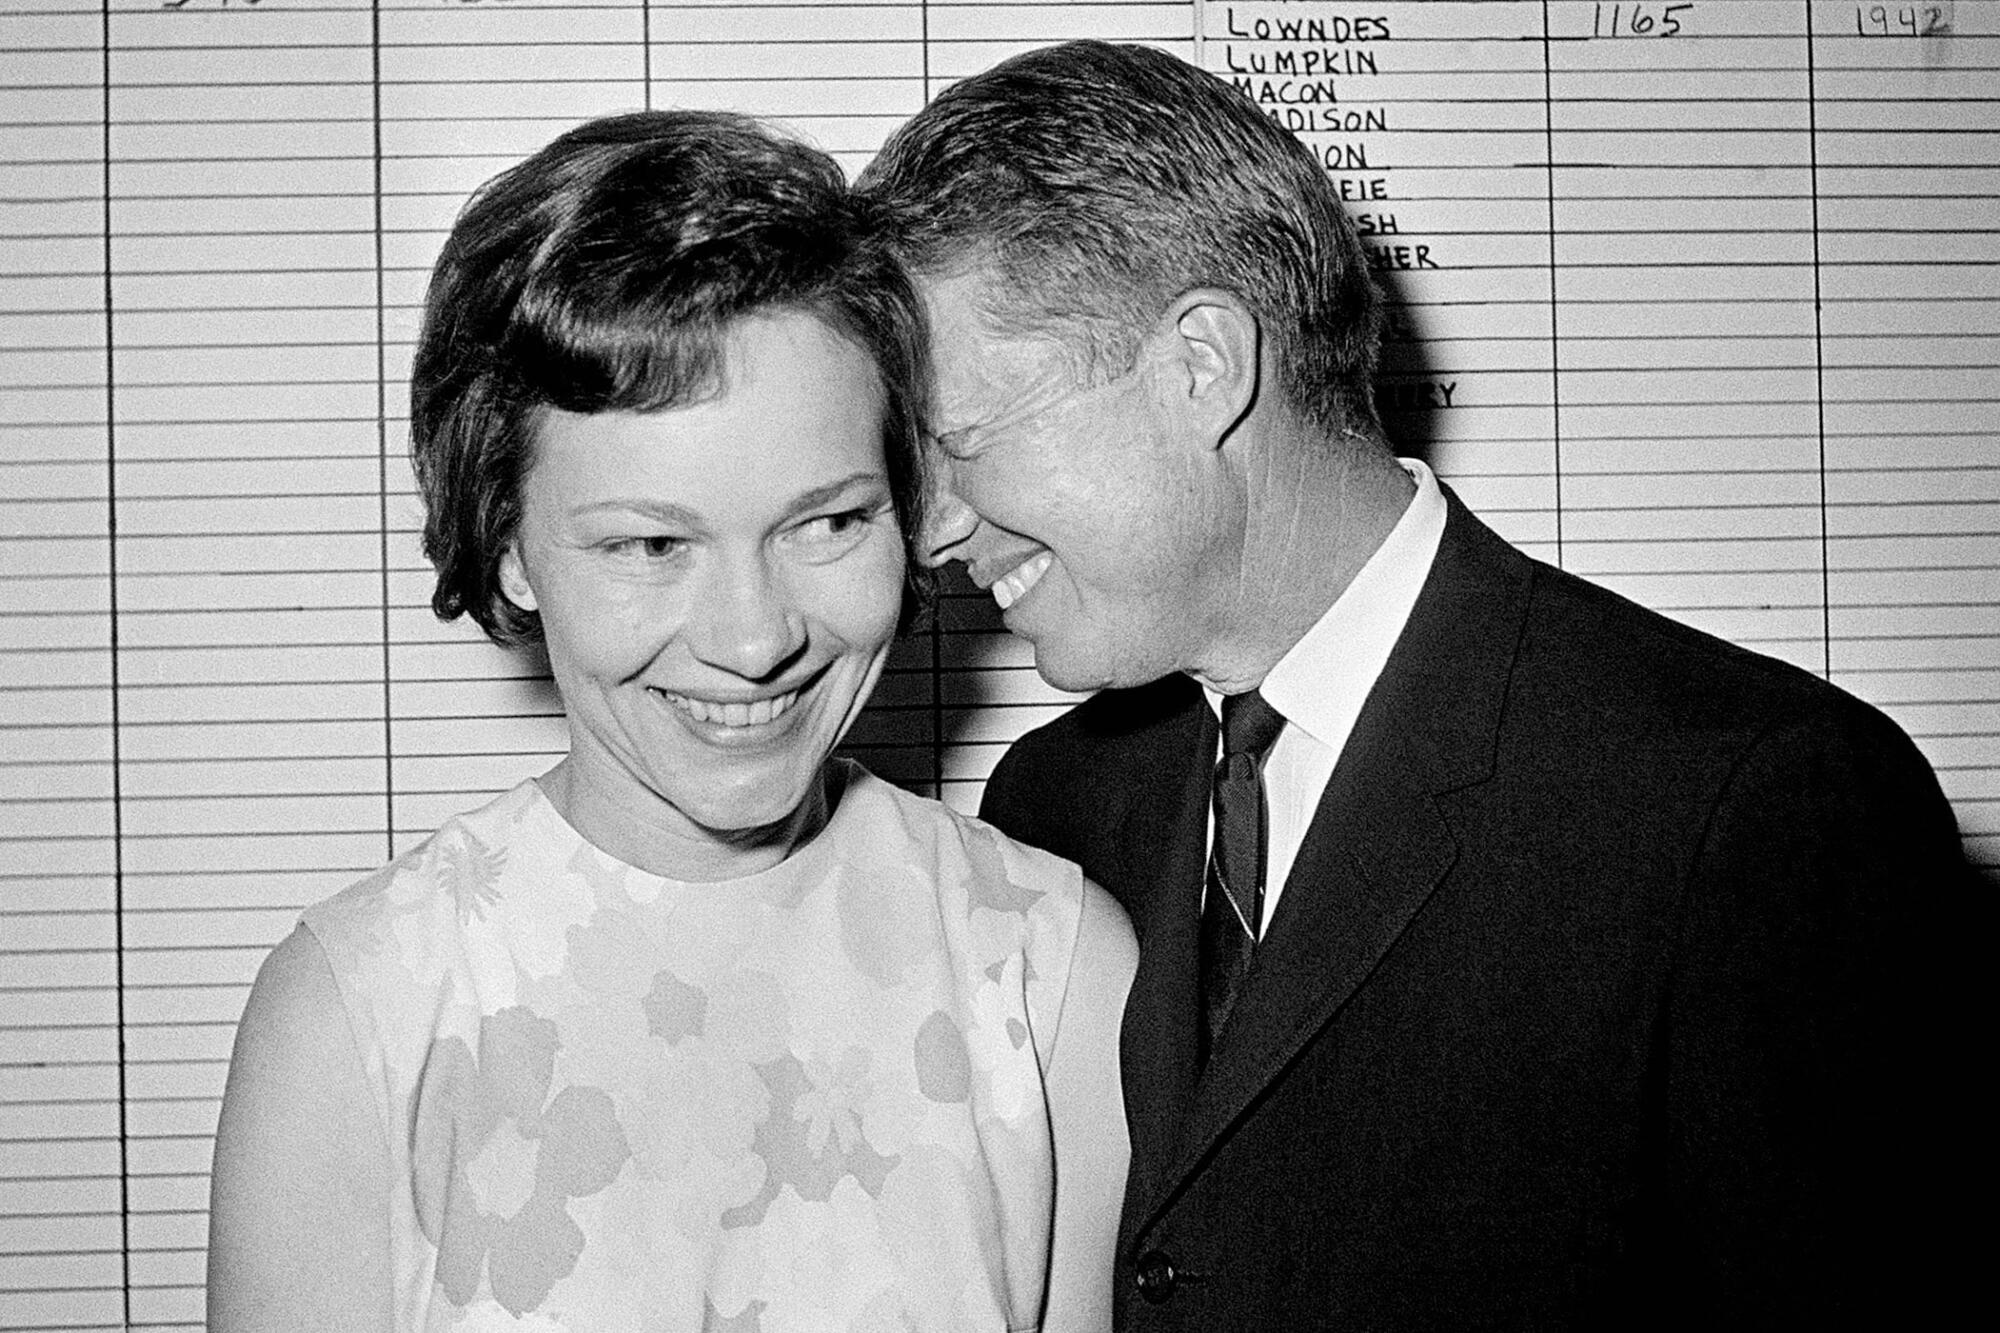 Rosalynn and Jimmy Carter stand together smiling.